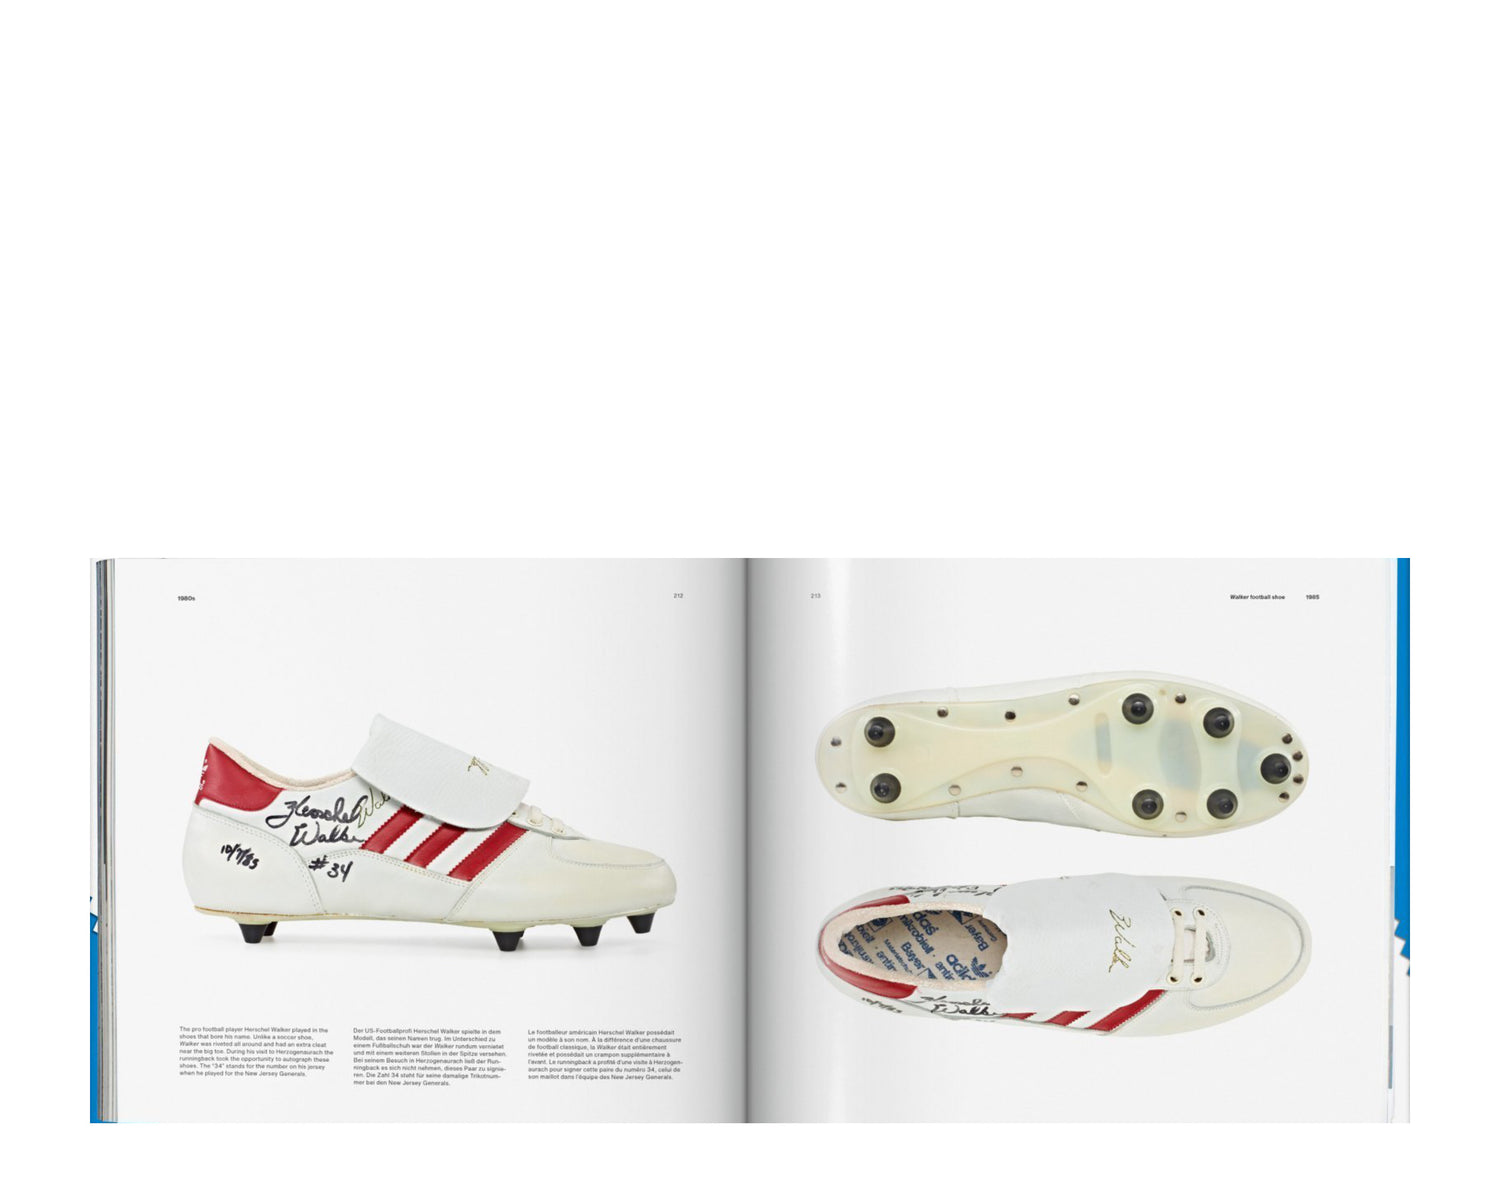 Taschen Books - The Adidas Archive - The Footwear Collection Hardcover Book